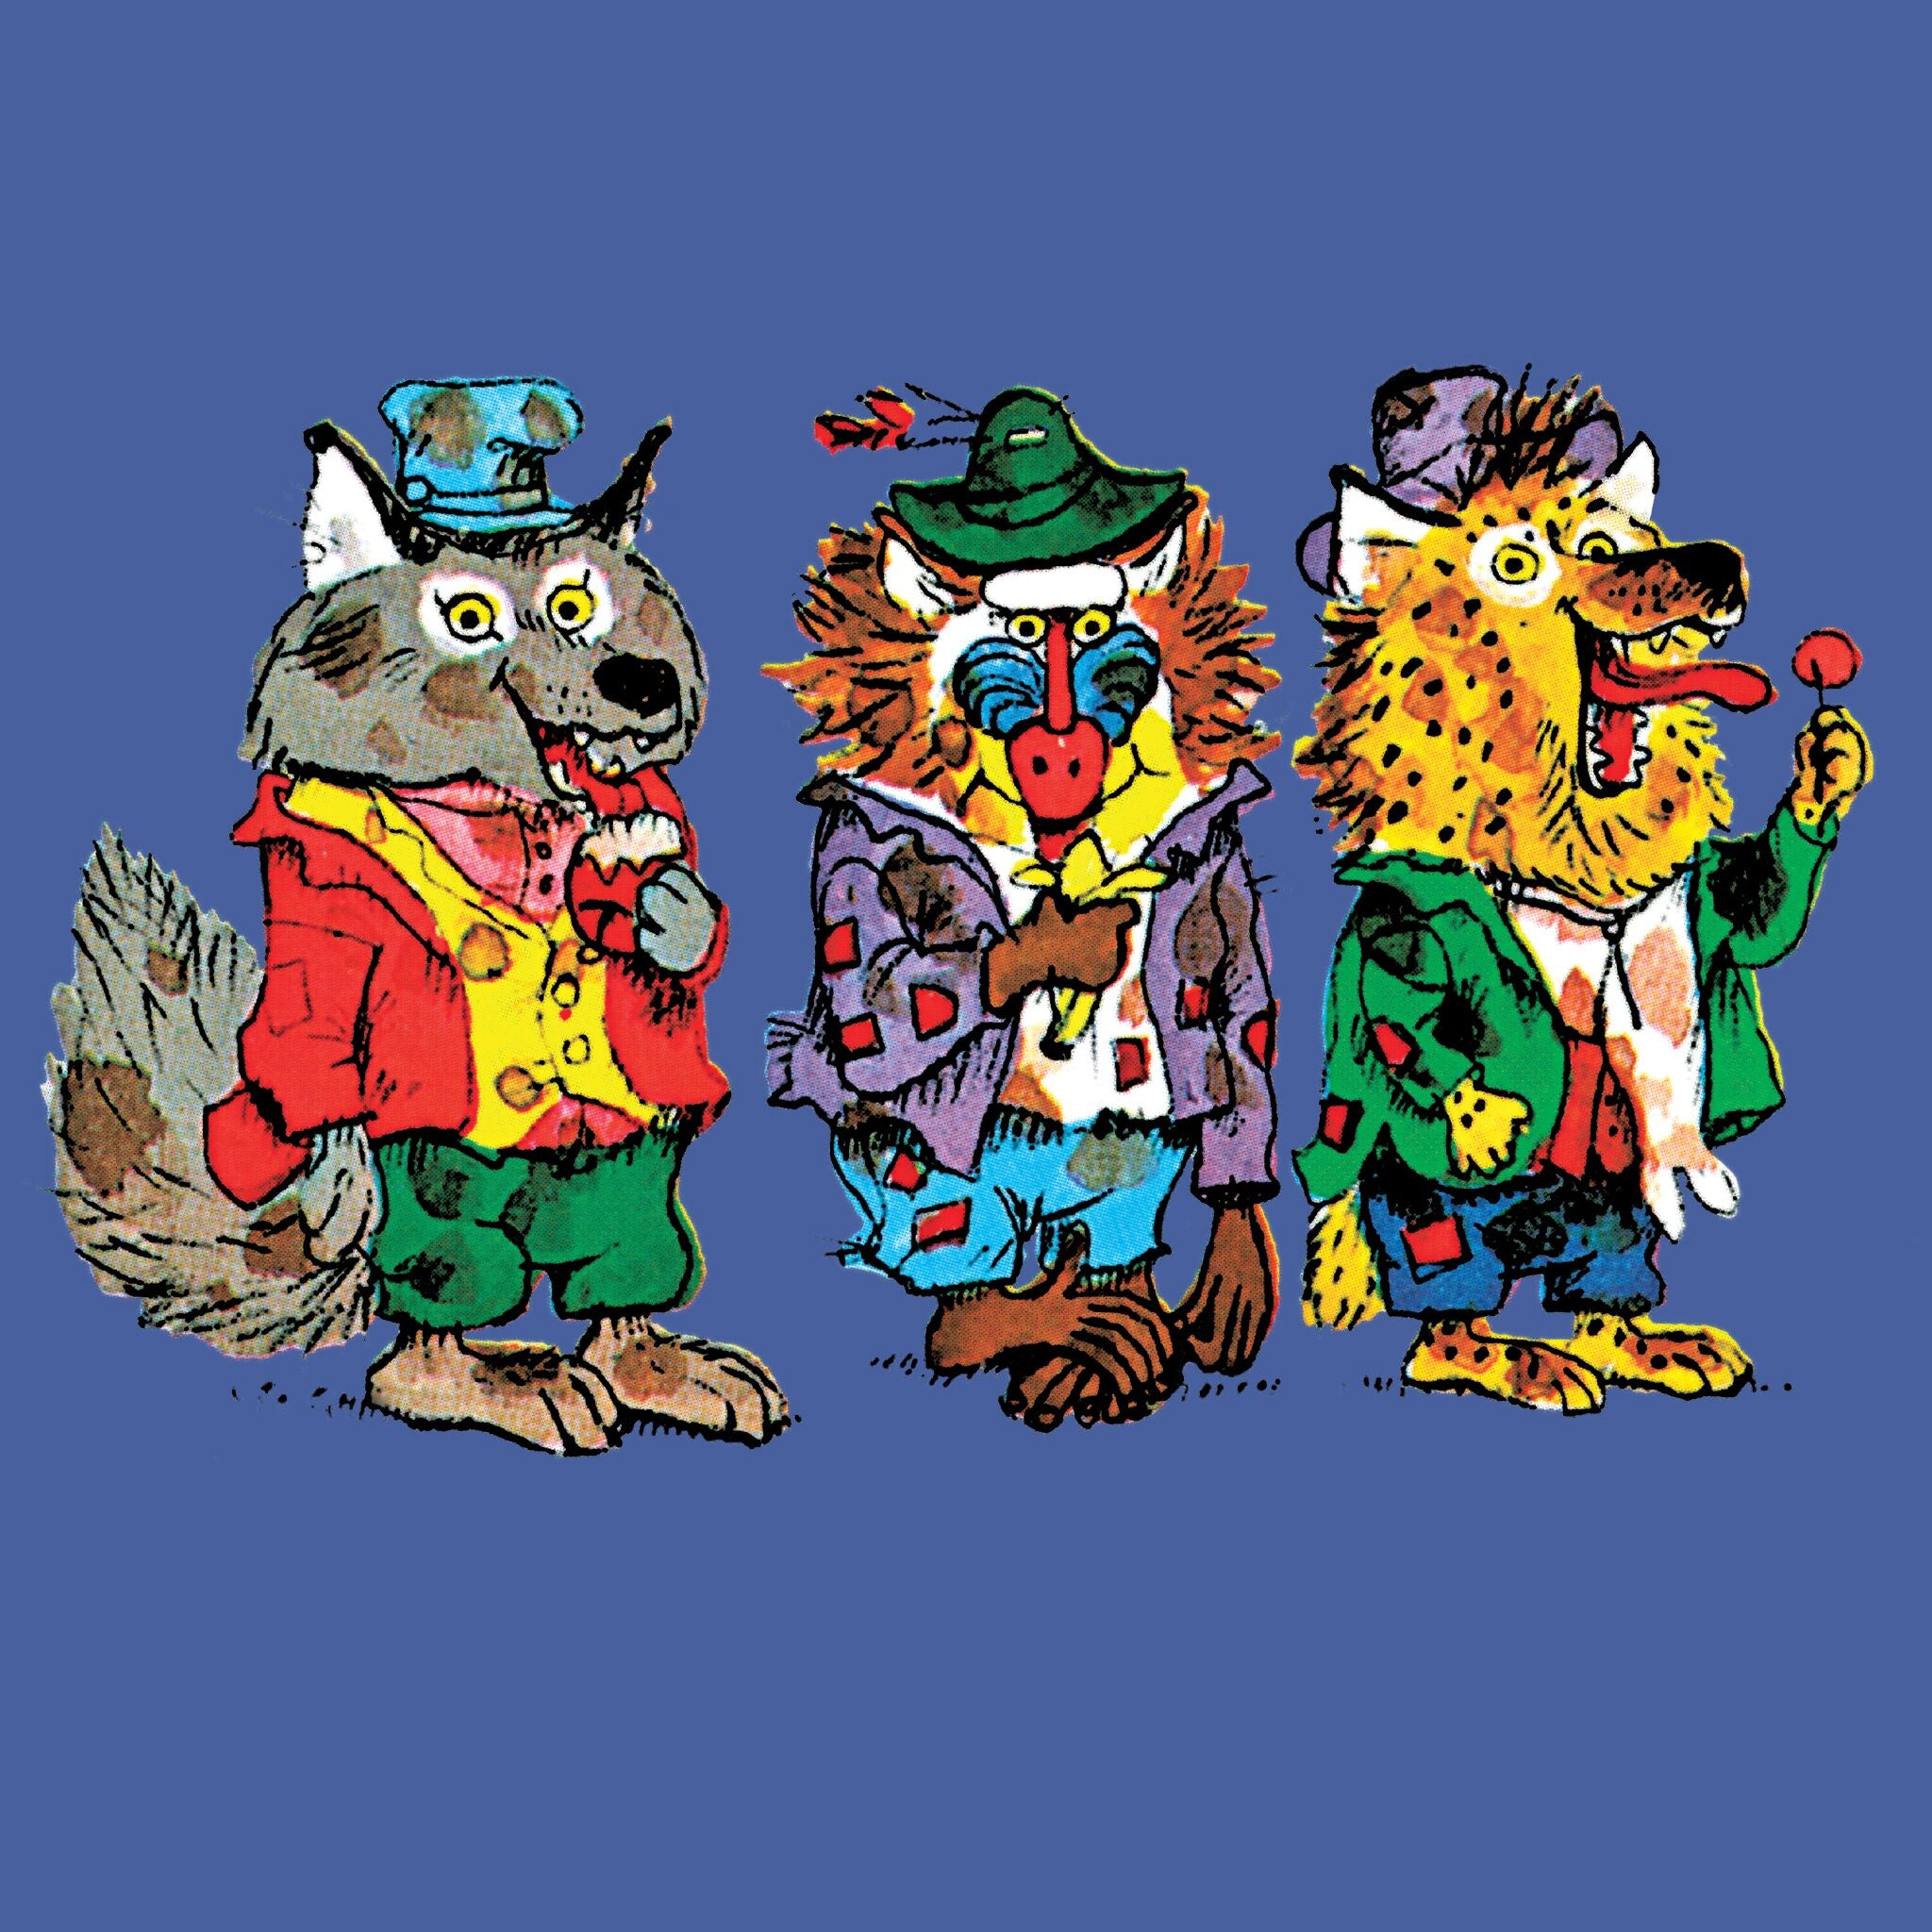 Richard Scarry Wolfgang Wolf, Barry Baboon, and Harry Hyena T-shirt